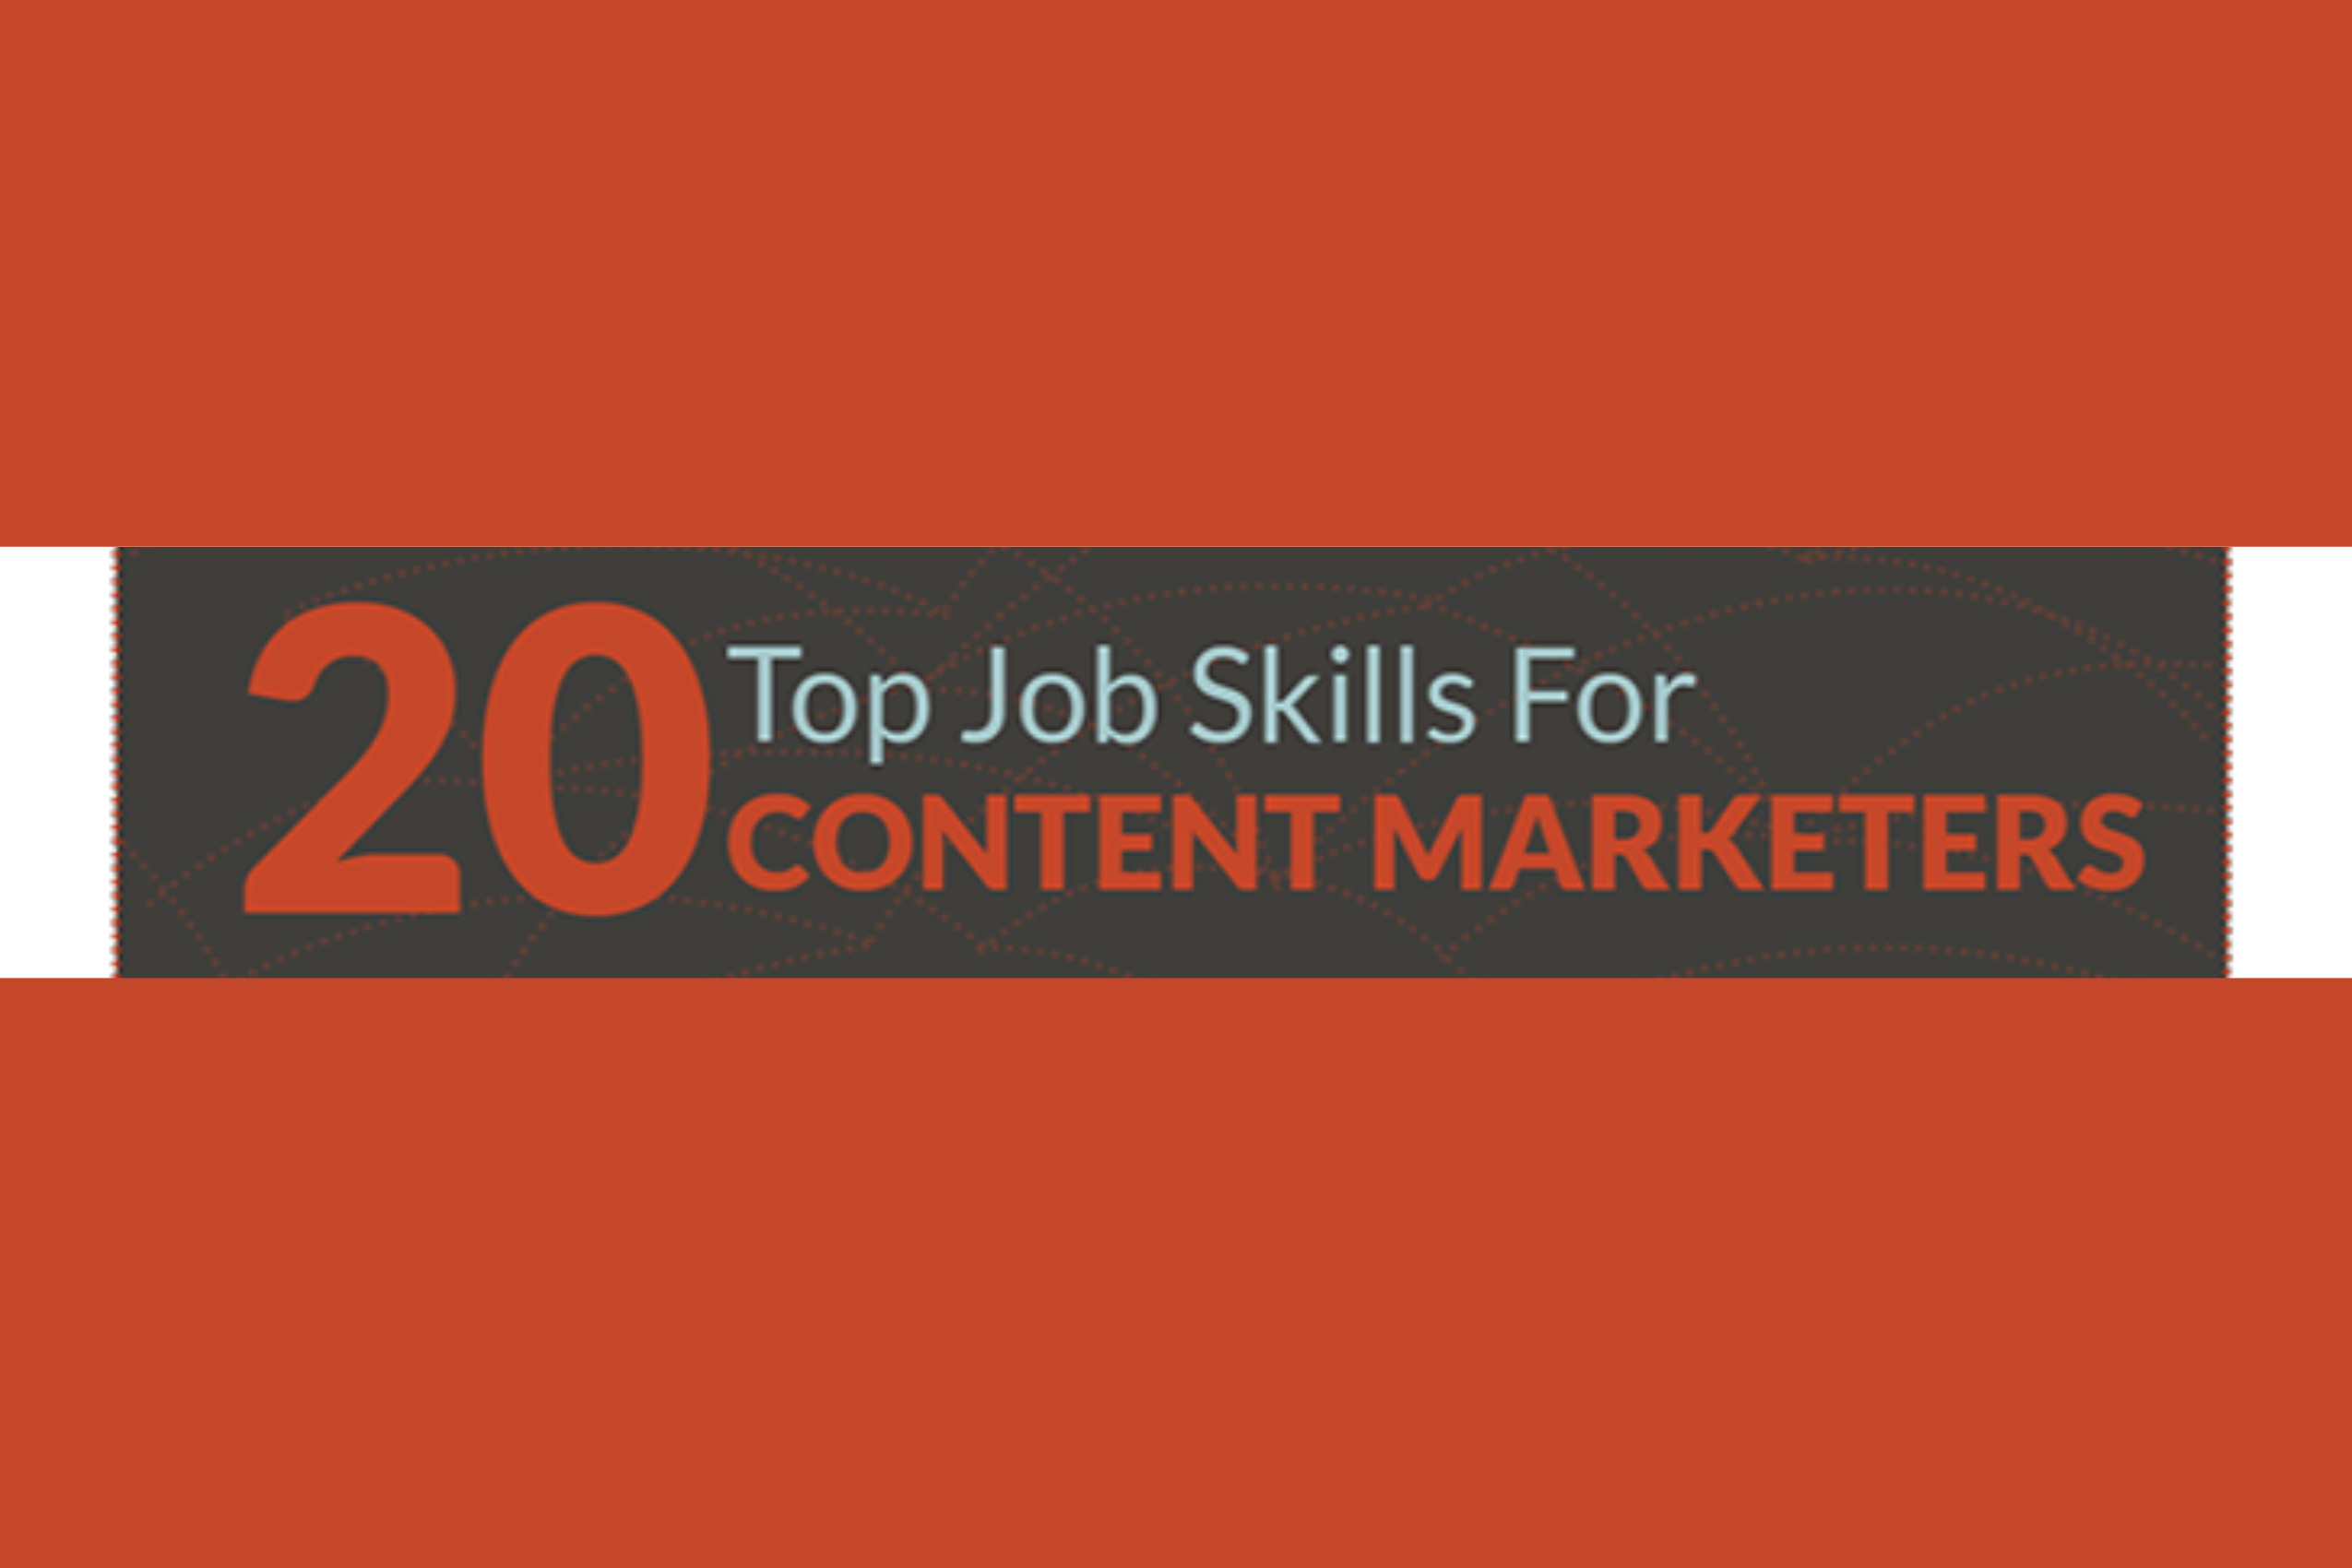 20 Top Job Skills For Content Marketers (infographic)